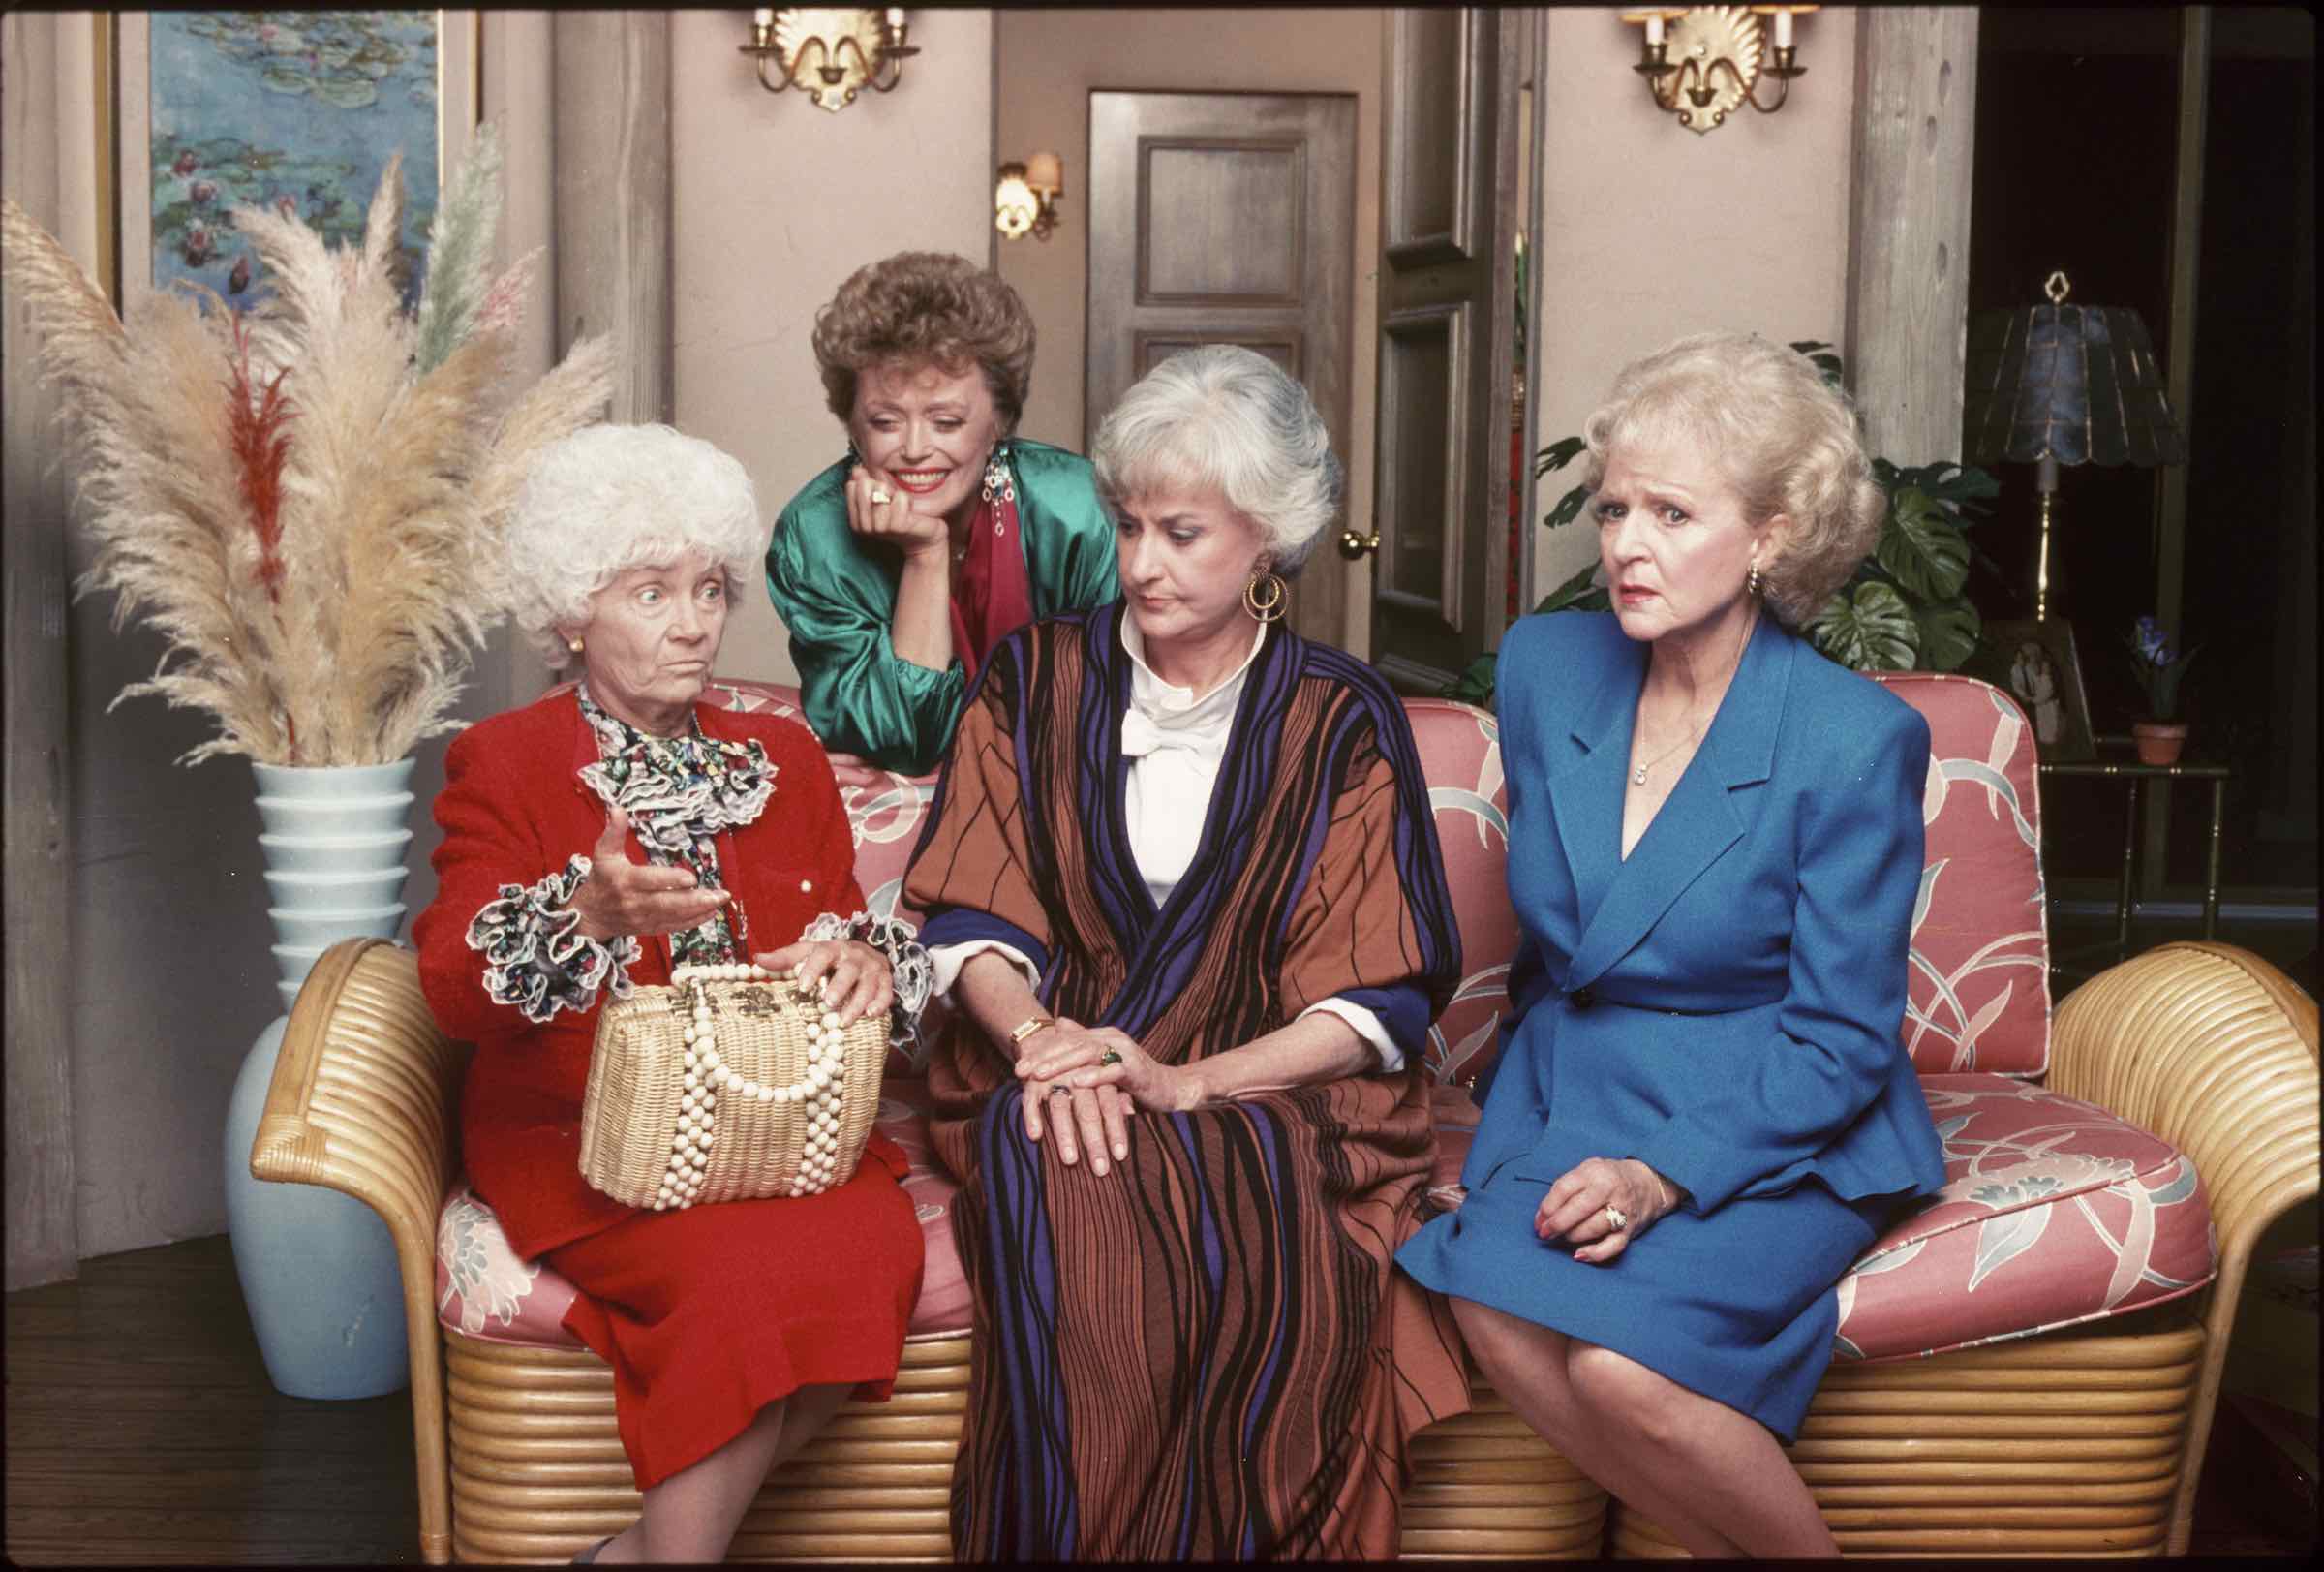 In honor of a shiny new 'The Golden Girls' coming our way on Netflix, here are five of our favorite episodes from NBC’s best show of the 80s.